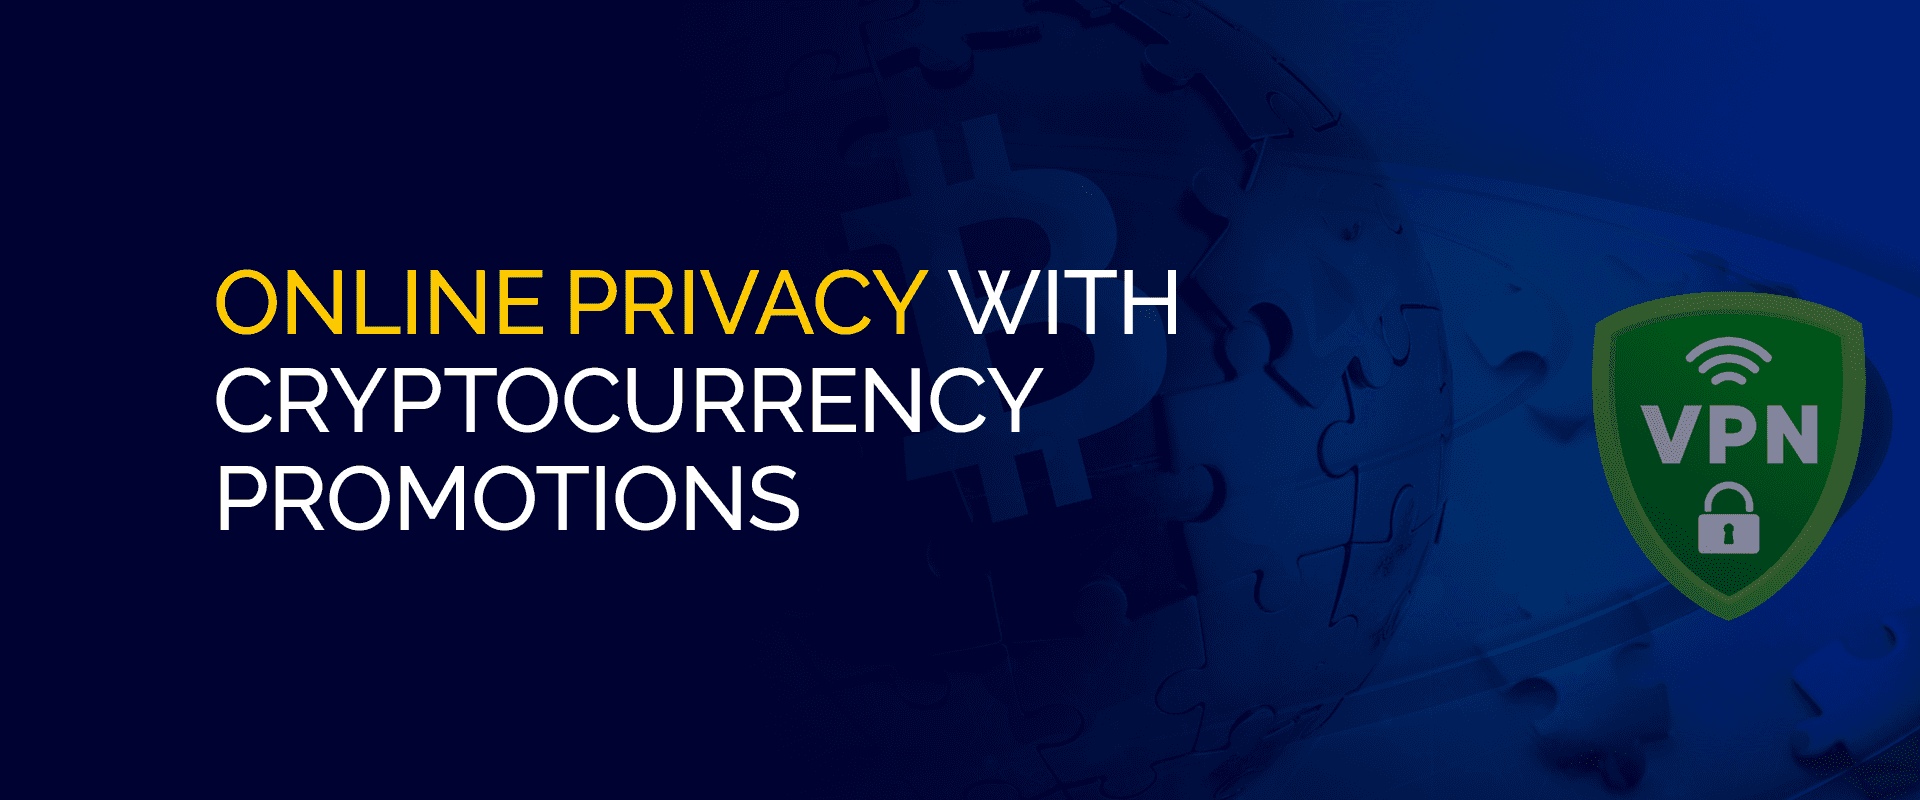 Online Privacy with Cryptocurrency Promotions